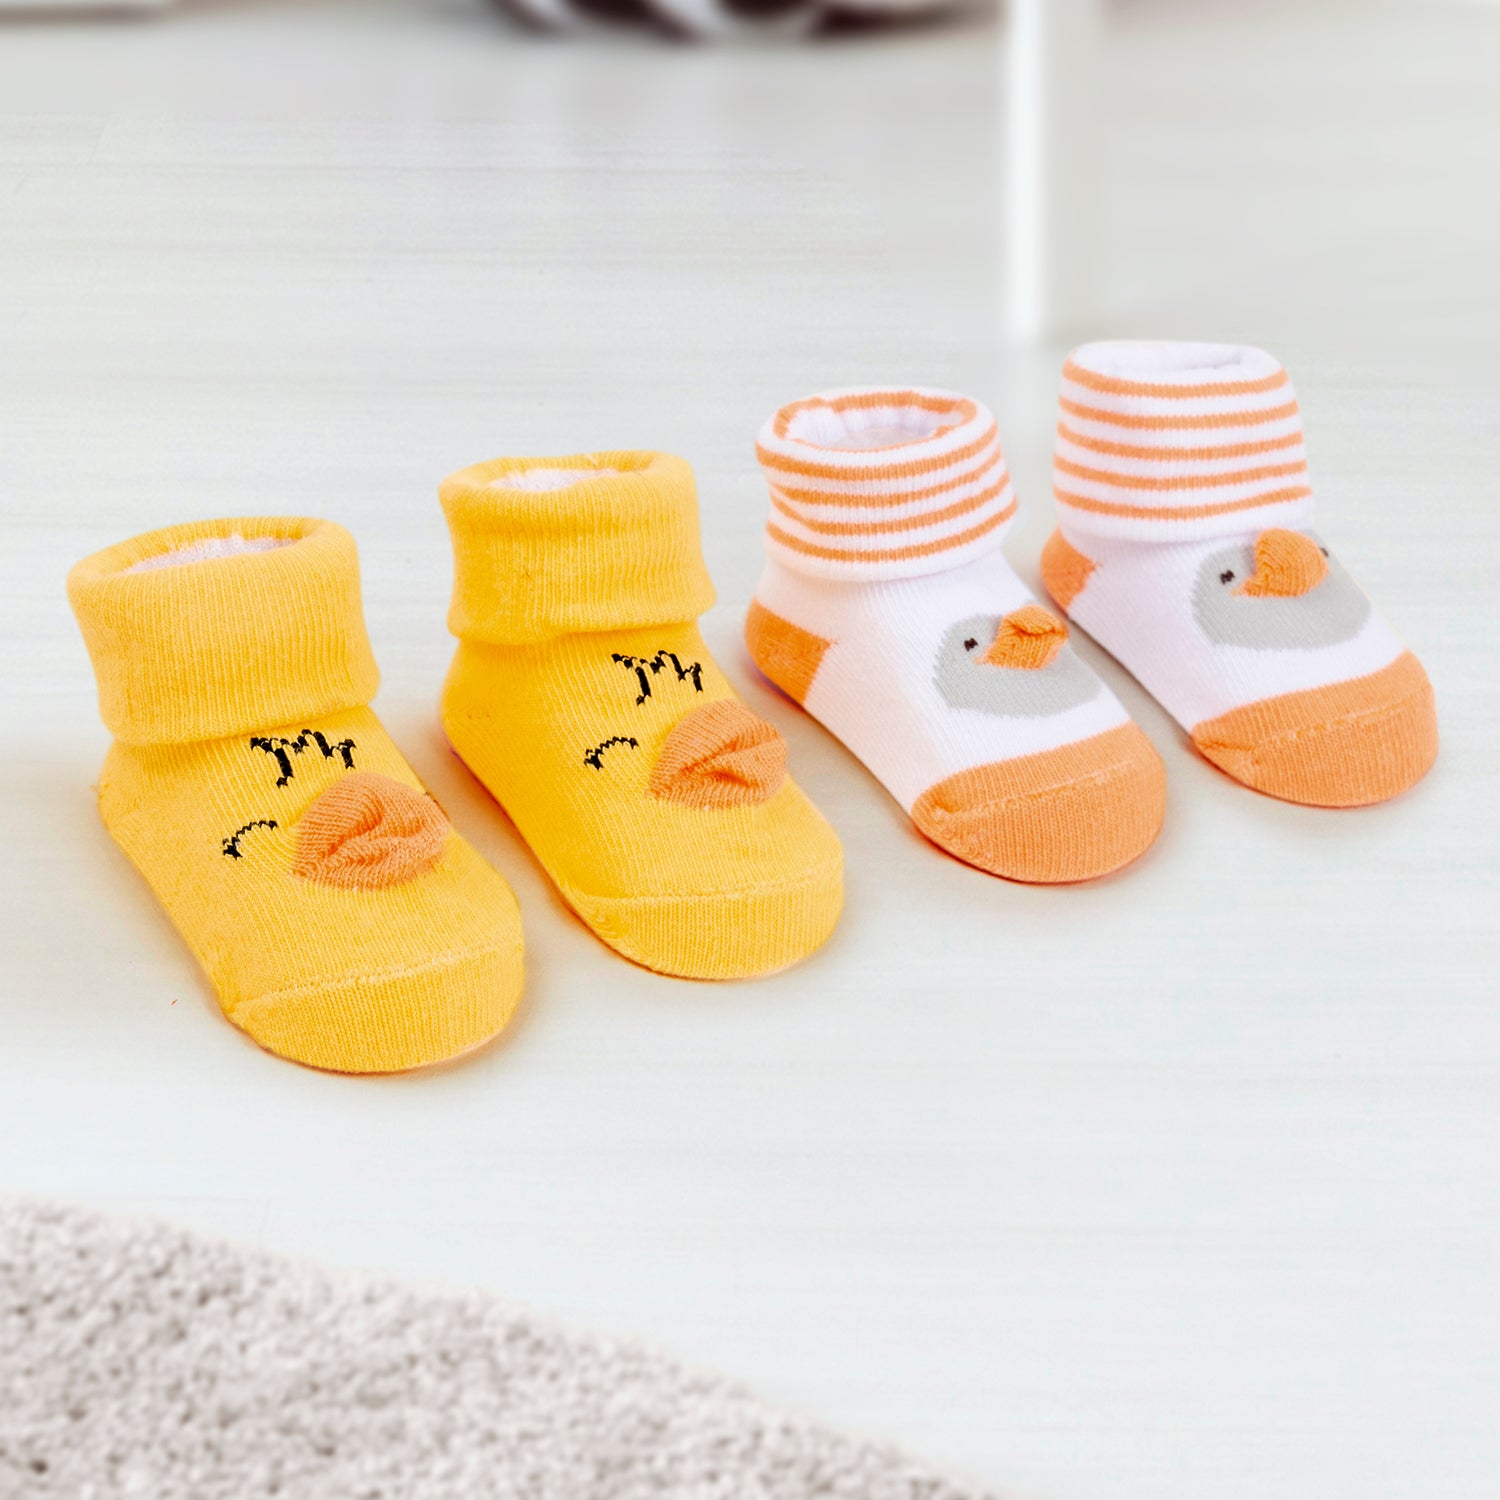 Baby Moo 3D Penguin Chick Cotton Ankle Length Infant Dress Up Walking Set of 2 Socks Booties - Yellow